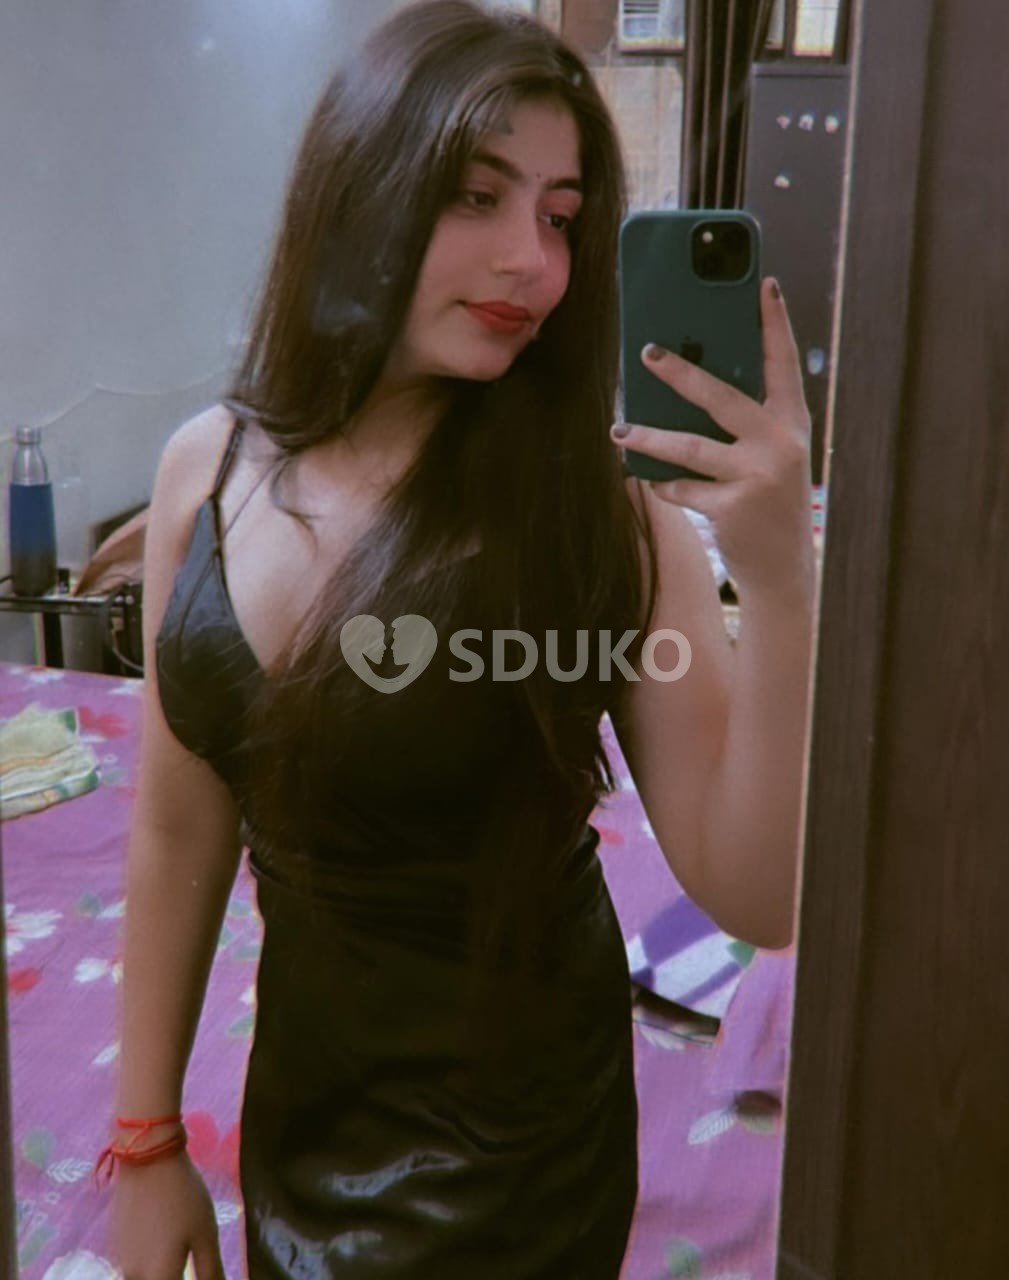 Cuddalore ⭐ ⭐ Best Vvip High Profile College And Bhabhis Safe Escort Service Available